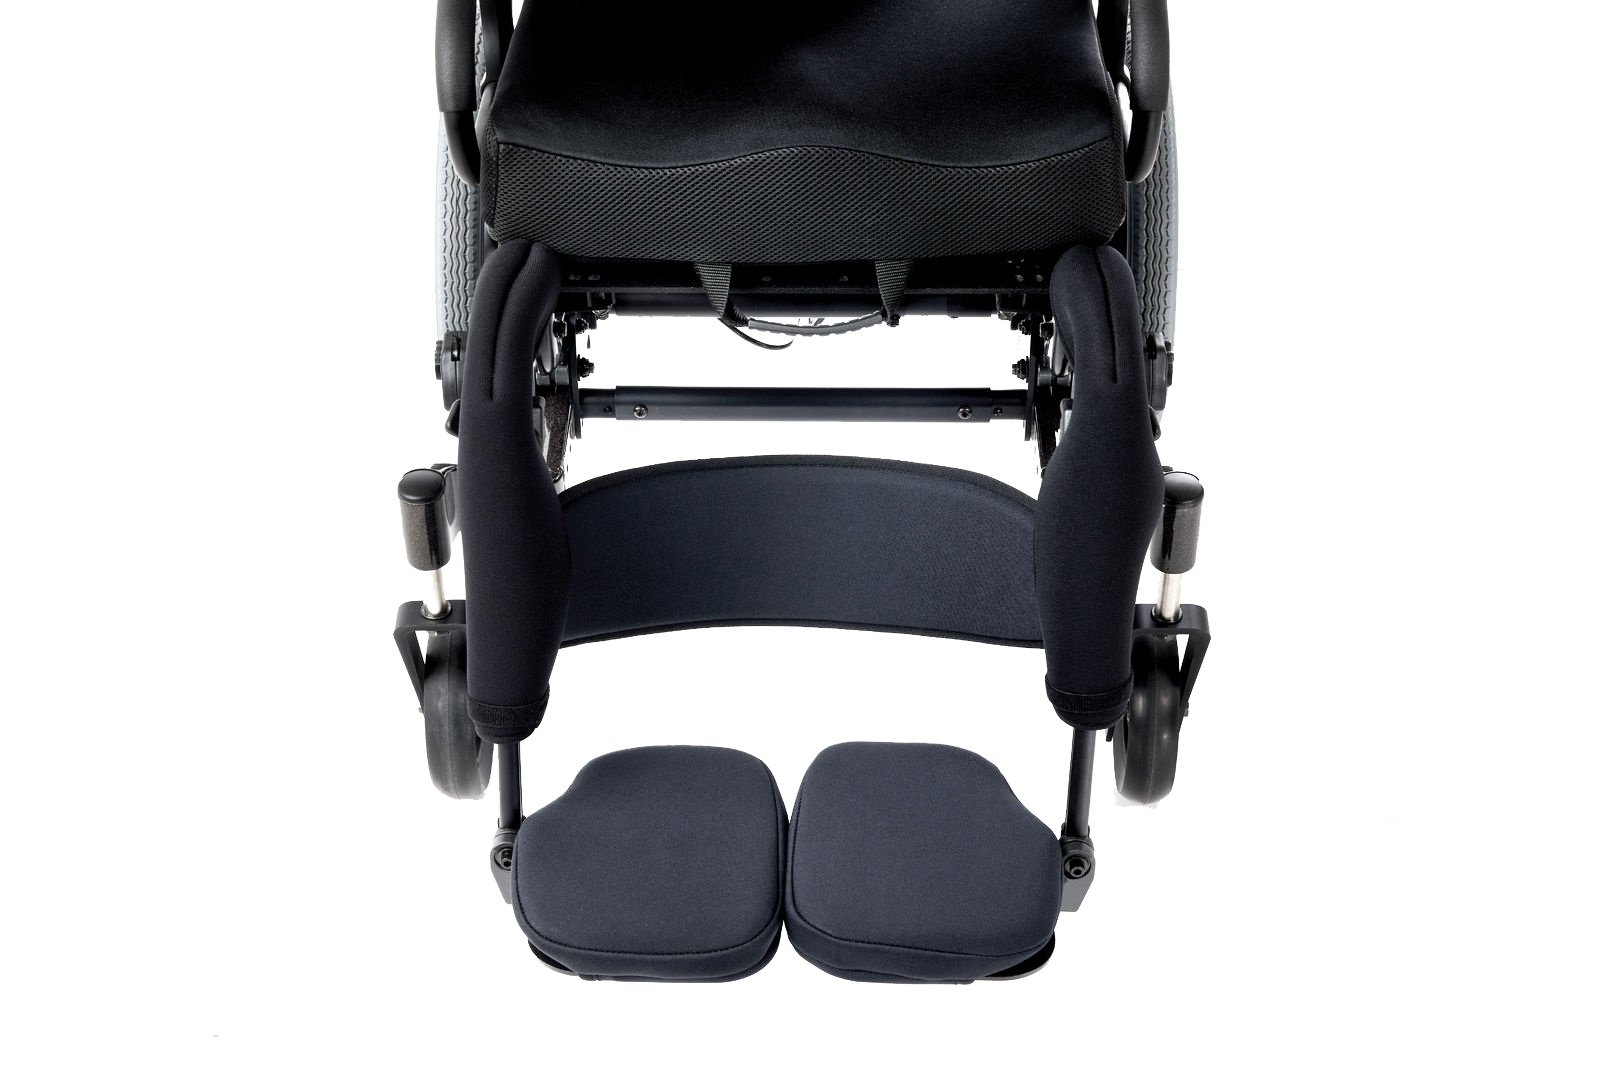 Lower leg support considerations in wheelchair seating – Calf Straps - Spex  Seating Global : Spex Seating Global